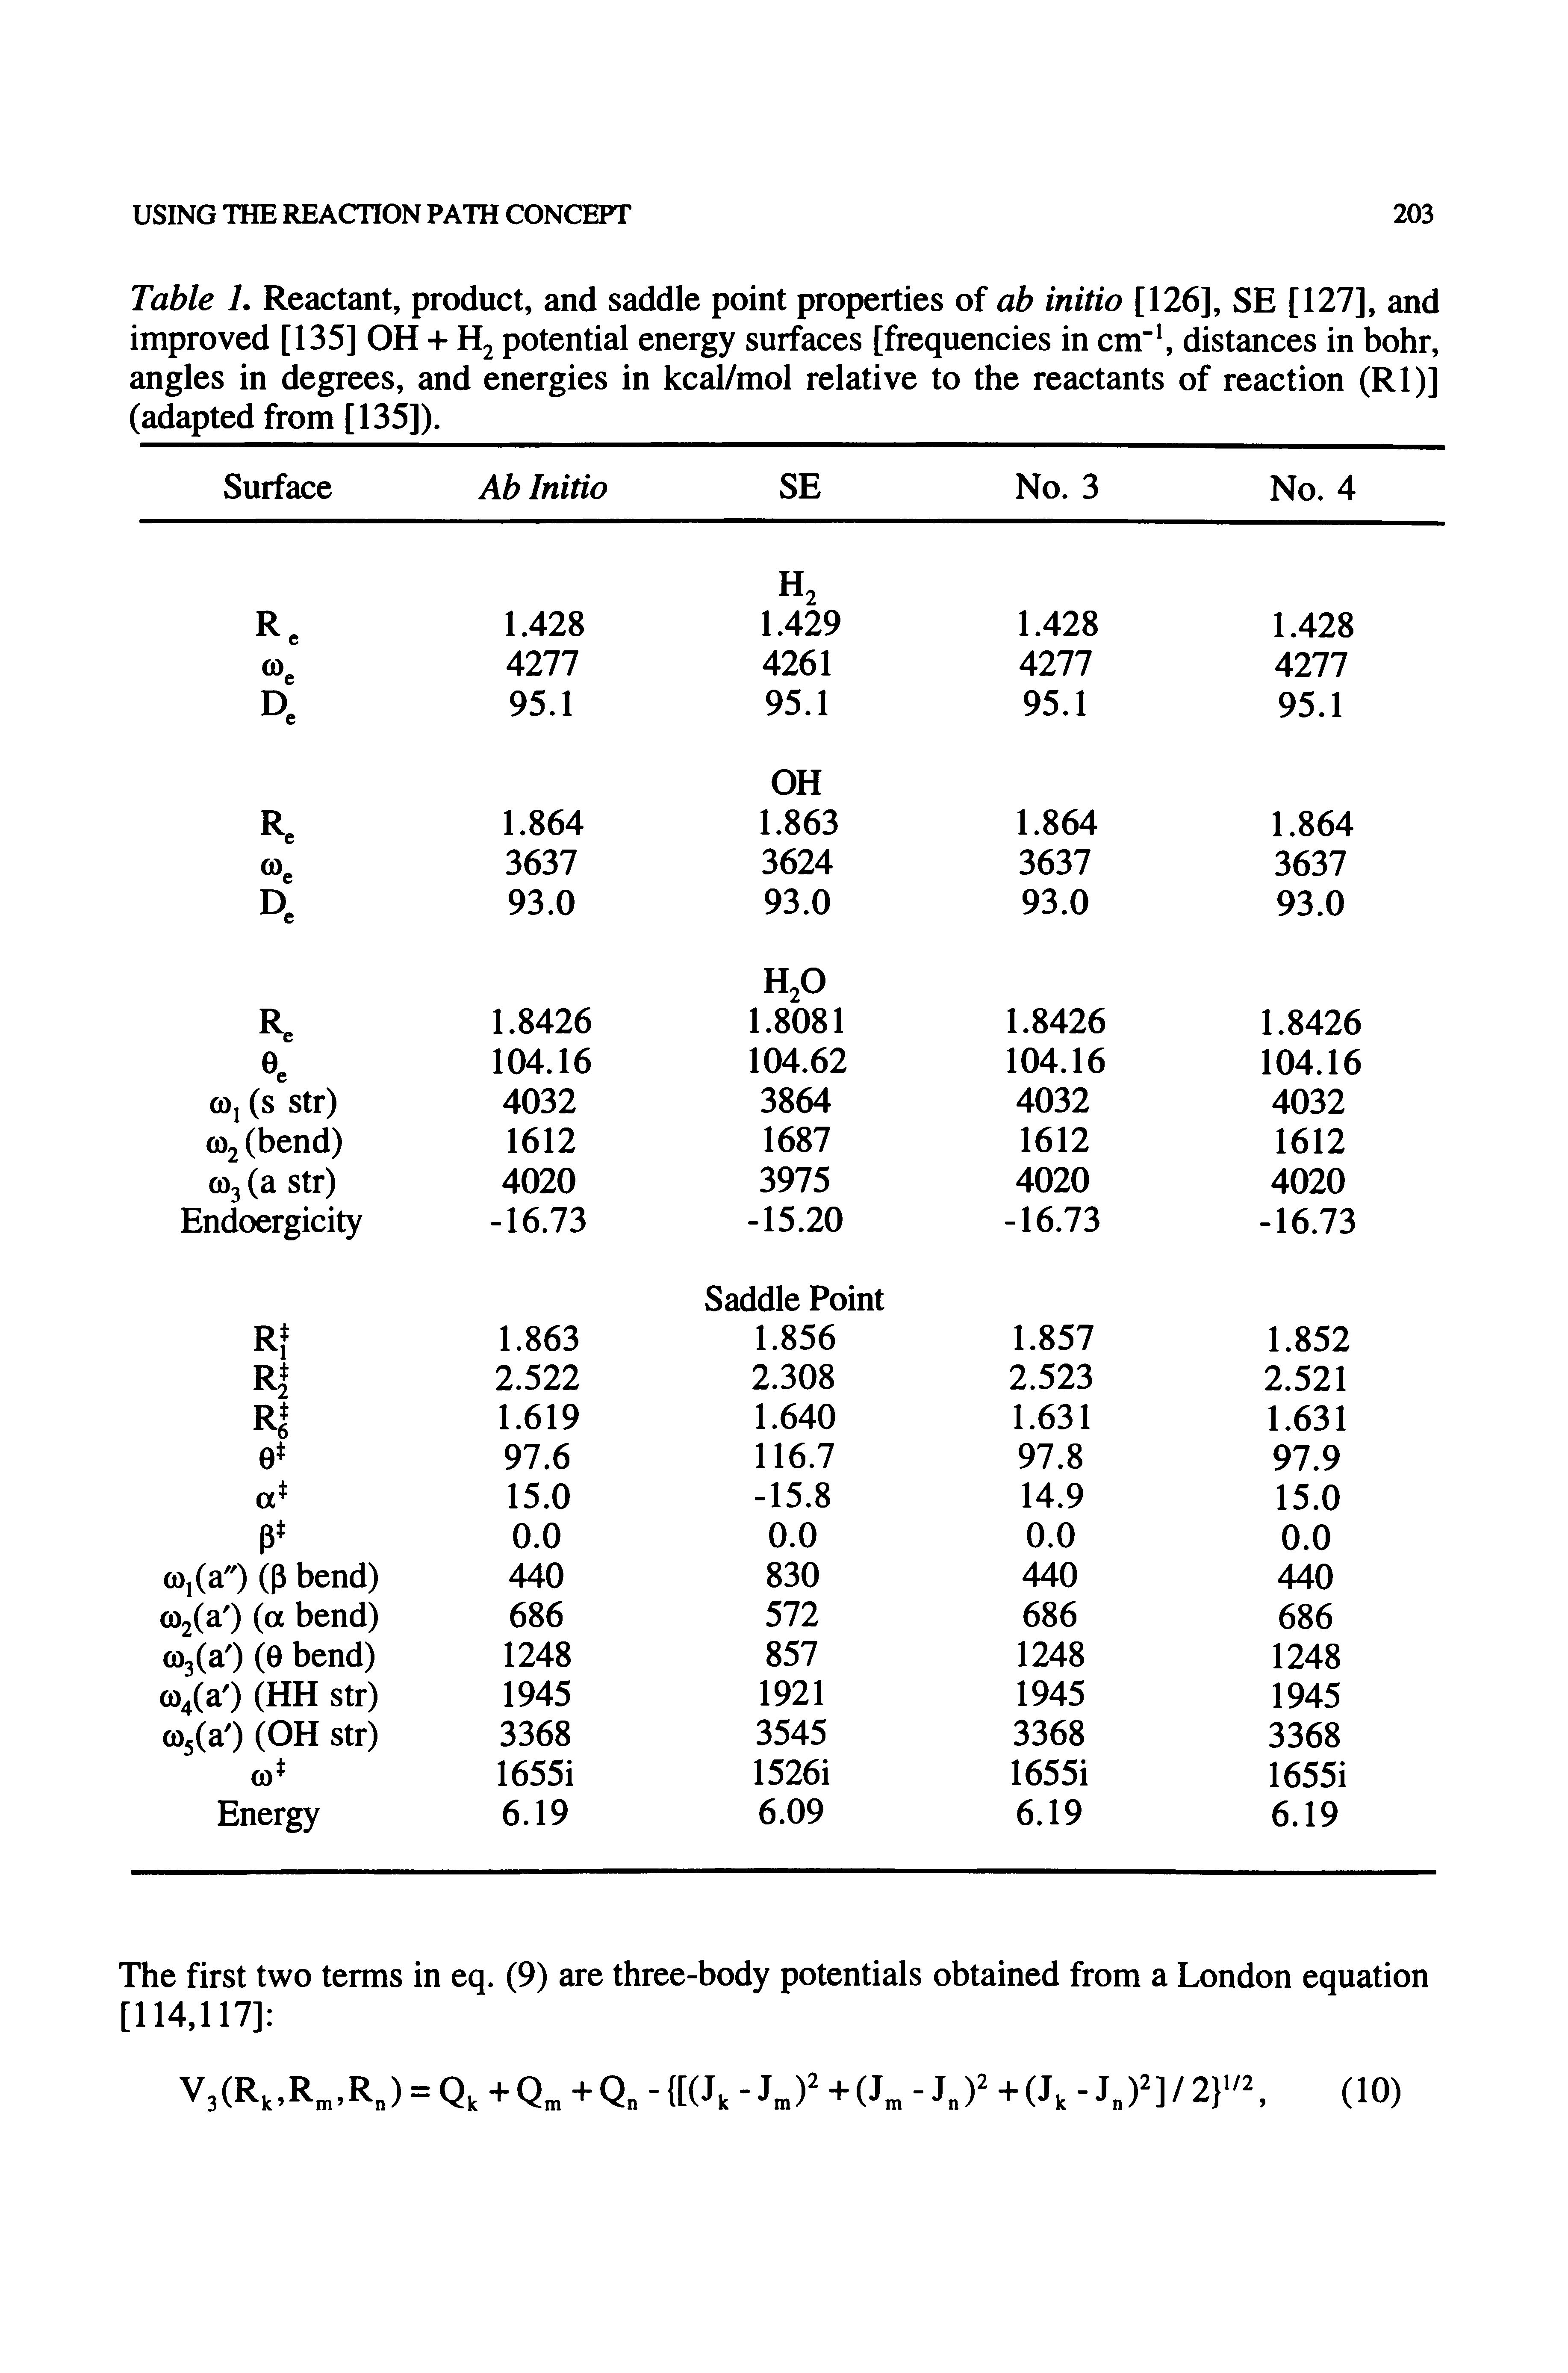 Table L Reactant, product, and saddle point properties of ab initio [126], SE [127], and improved [135] OH + H2 potential energy surfaces [frequencies in cm" distances in bohr, angles in degrees, and energies in kcal/mol relative to the reactants of reaction (Rl)] (adapted from [135]).